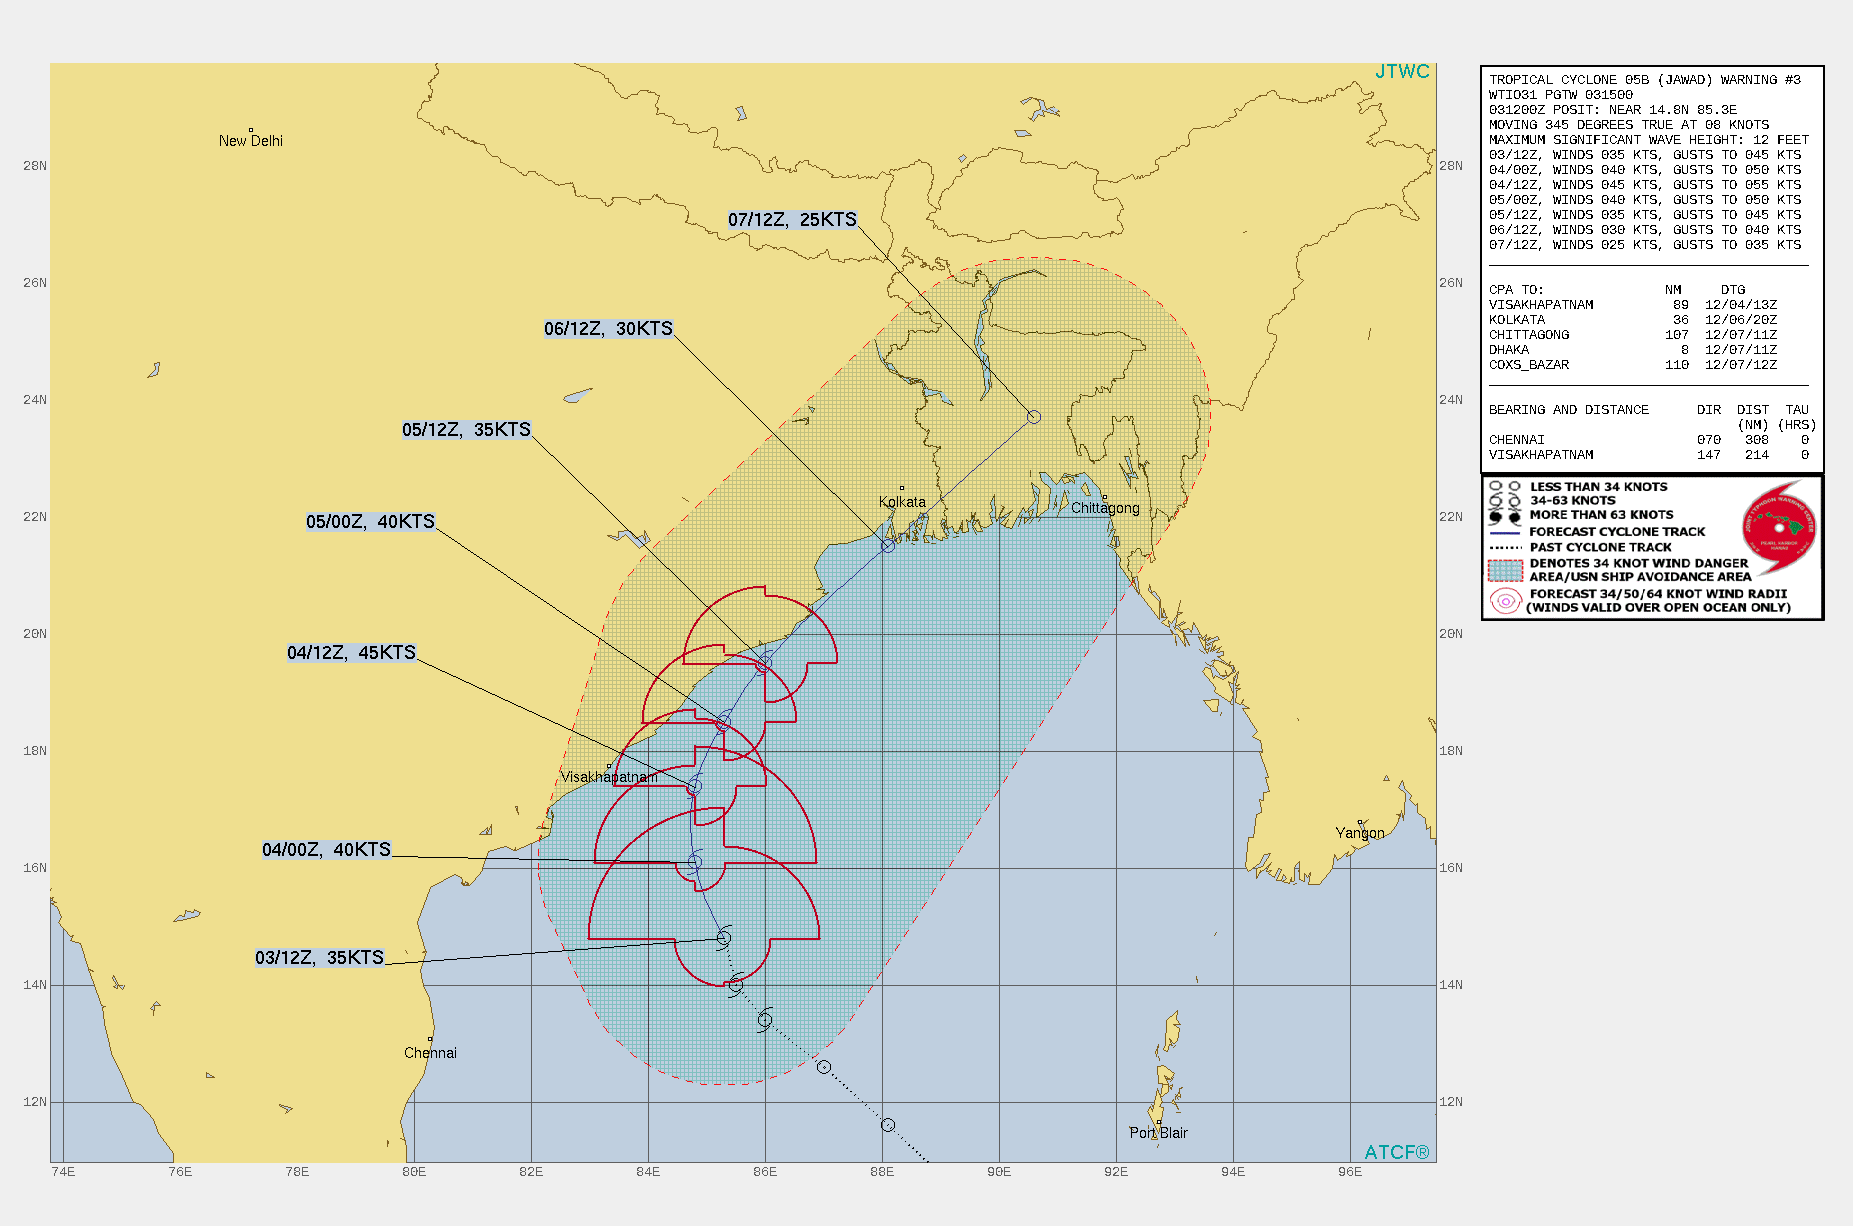 FORECAST REASONING.  SIGNIFICANT FORECAST CHANGES: THERE ARE NO SIGNIFICANT CHANGES TO THE FORECAST FROM THE PREVIOUS WARNING.  FORECAST DISCUSSION: TC 05B IS FORECAST TO TRACK POLEWARD ALONG THE WESTERN PERIPHERY OF THE STR THROUGH 24H WHILE STEADILY INTENSIFYING TO A PEAK OF 45 KNOTS. BY 36H, THE SYSTEM WILL BEGIN TO ENCOUNTER UPPER-LEVEL SOUTHWESTERLY FLOW WITH 25-30 KNOTS OF VERTICAL WIND SHEAR (VWS), WHICH WILL PRODUCE STEADY WEAKENING AS THE SYSTEM APPROACHES THE NORTHEAST COAST OF INDIA. AS TC 05B RECURVES NORTHEASTWARD AFTER 48H, VWS WILL INCREASE TO 40-50 KNOTS WITH DISSIPATION FORECAST BETWEEN 72H AND 96H, PERHAPS SOONER. THE REMNANTS SHOULD TRACK INTO BANGLADESH BUT COULD ALSO STALL OVER THE NORTHERN BAY OF BENGAL.